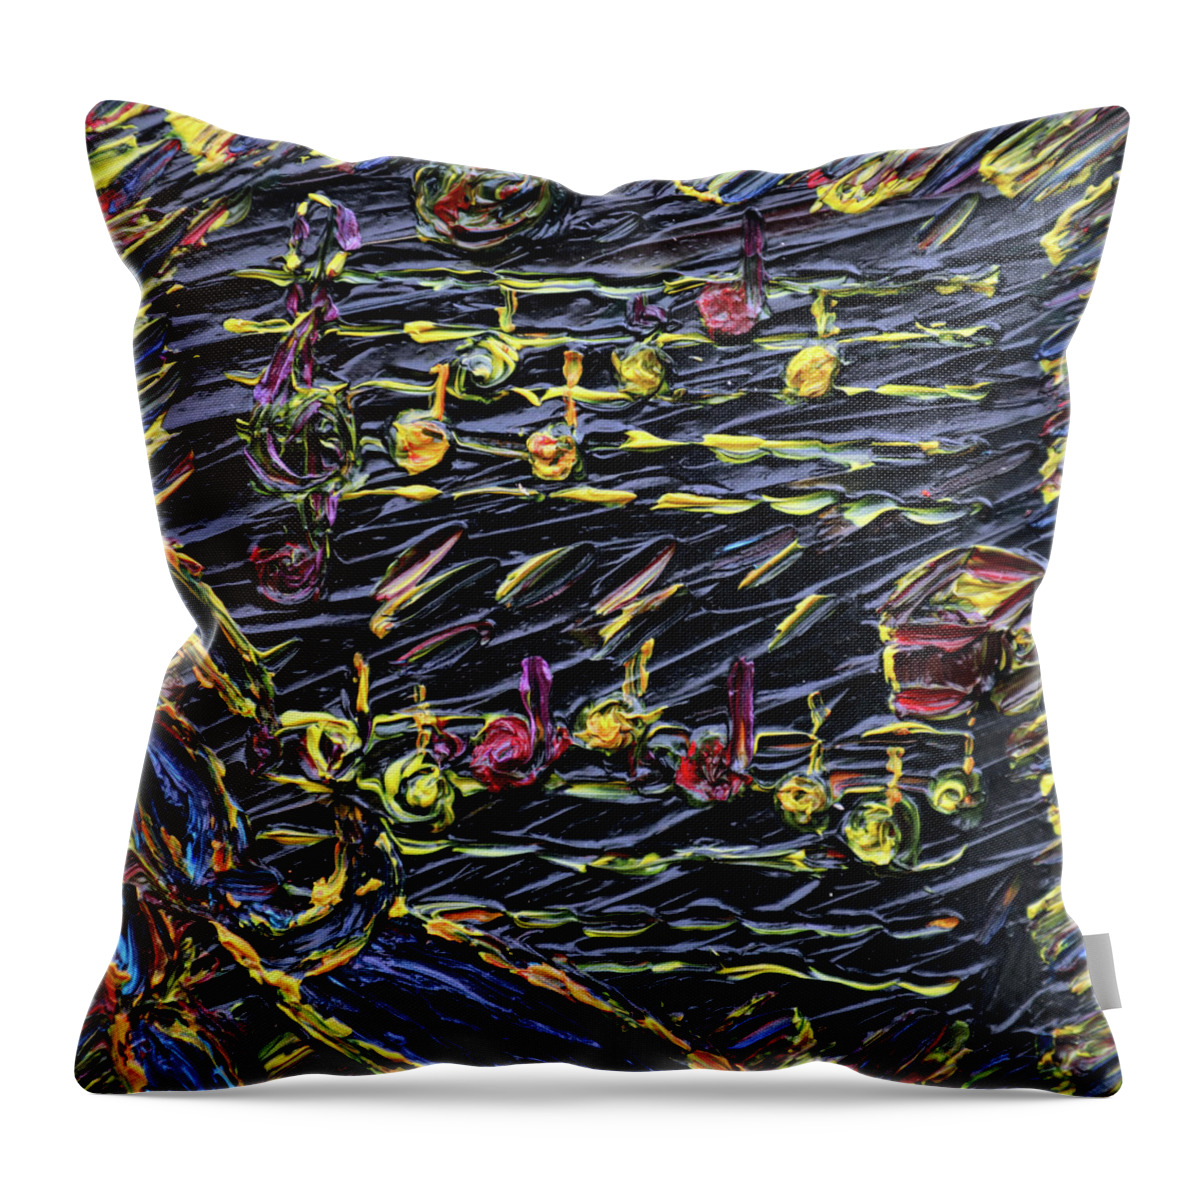 Fayer Throw Pillow featuring the painting In vasser und fayer by Vadim Levin